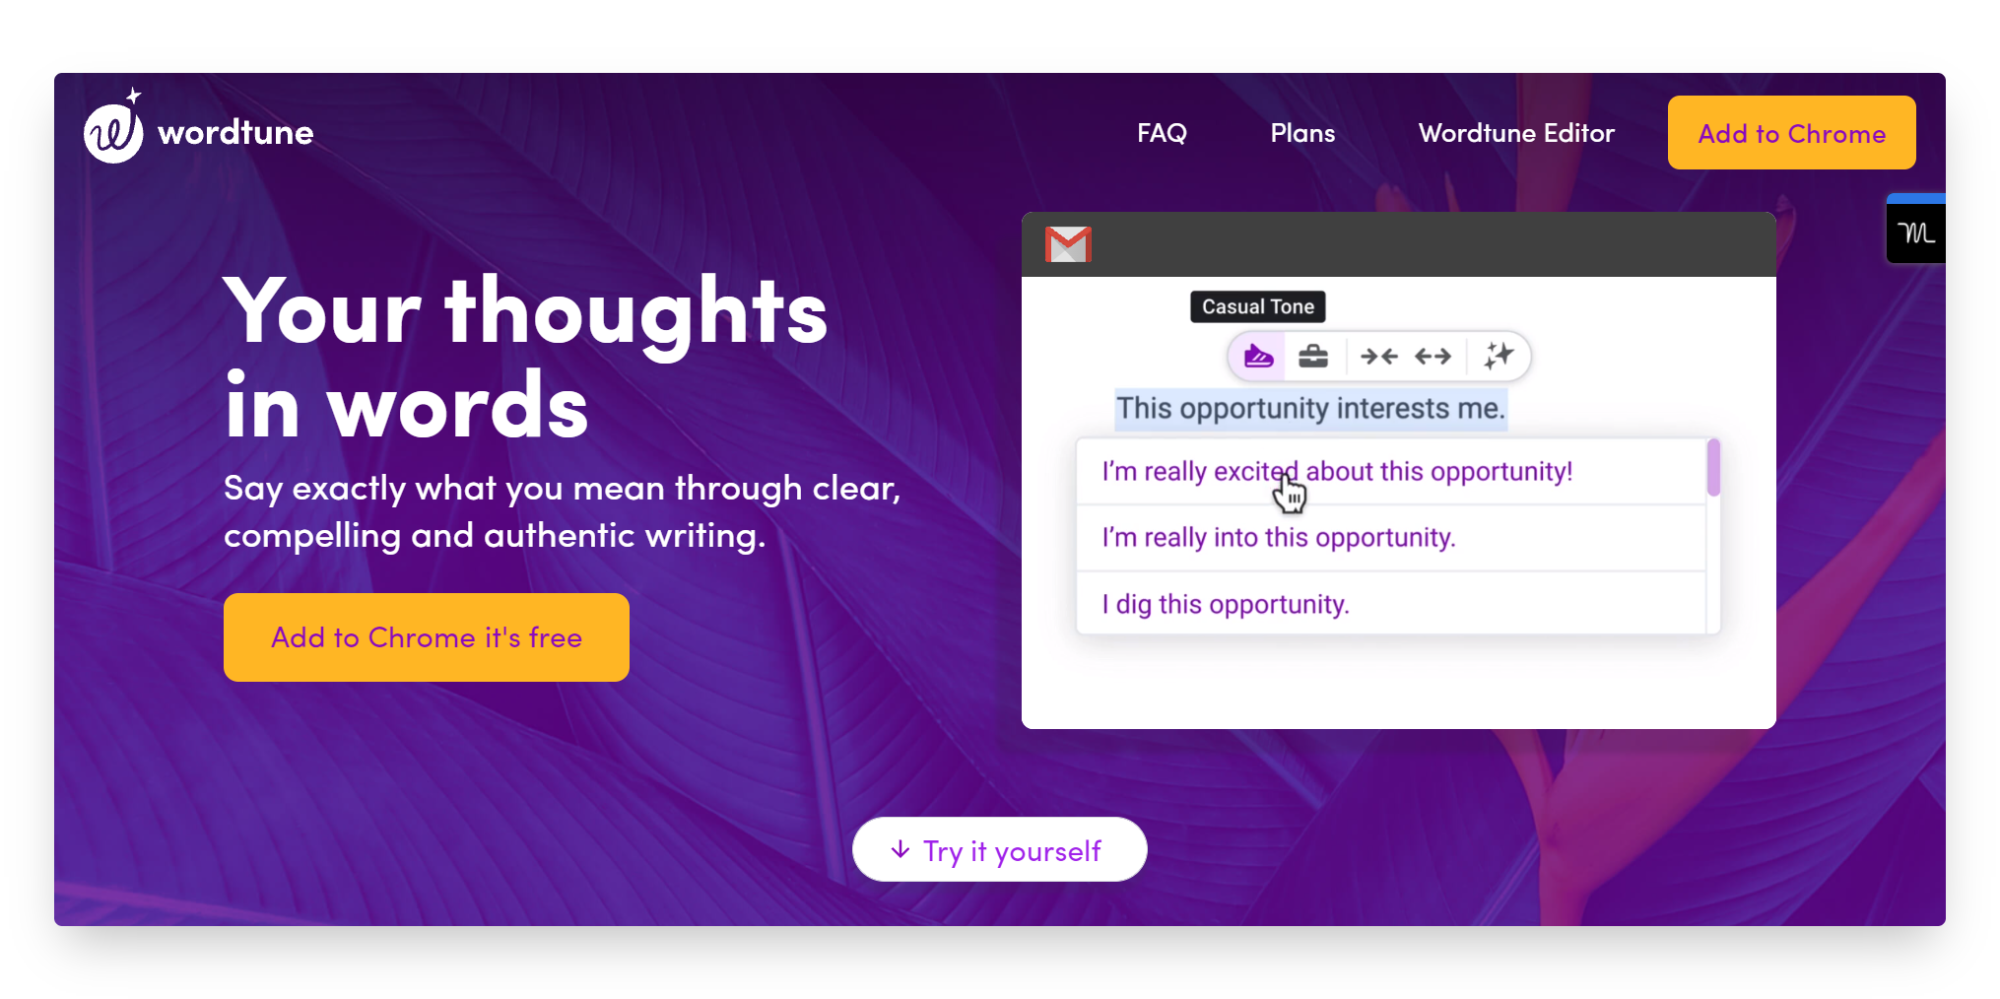 Wordtune: Your thoughts in words ✍